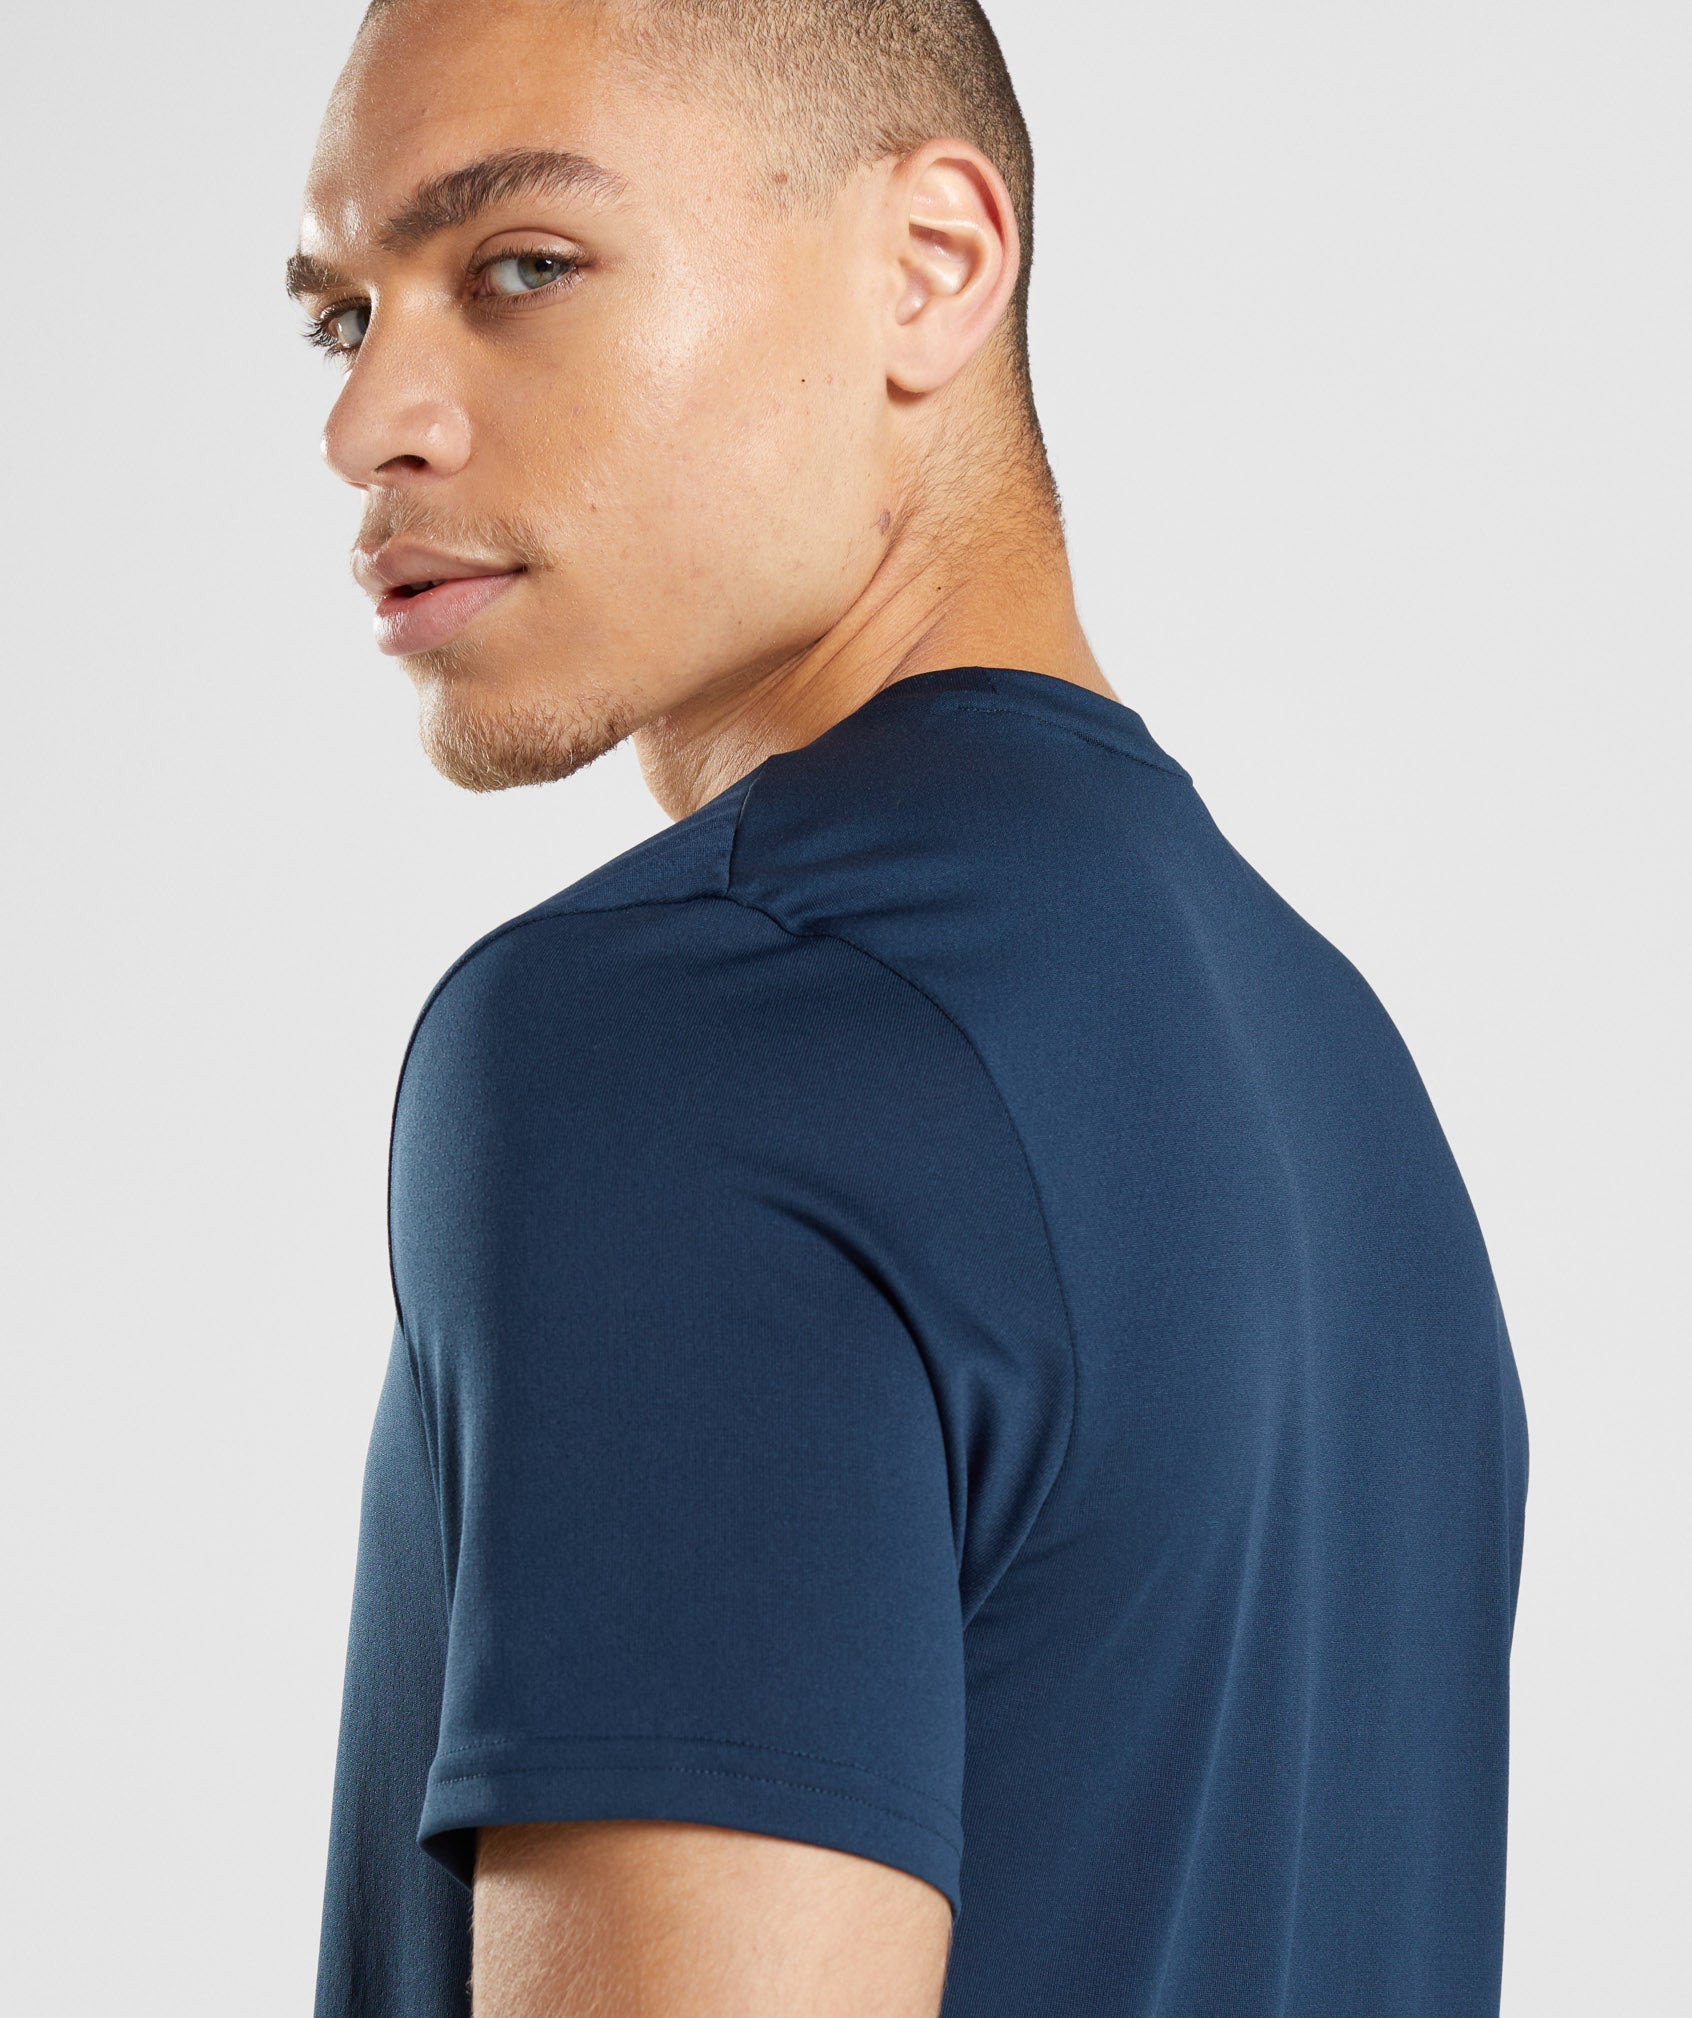 Arrival T-Shirt in Navy - view 5